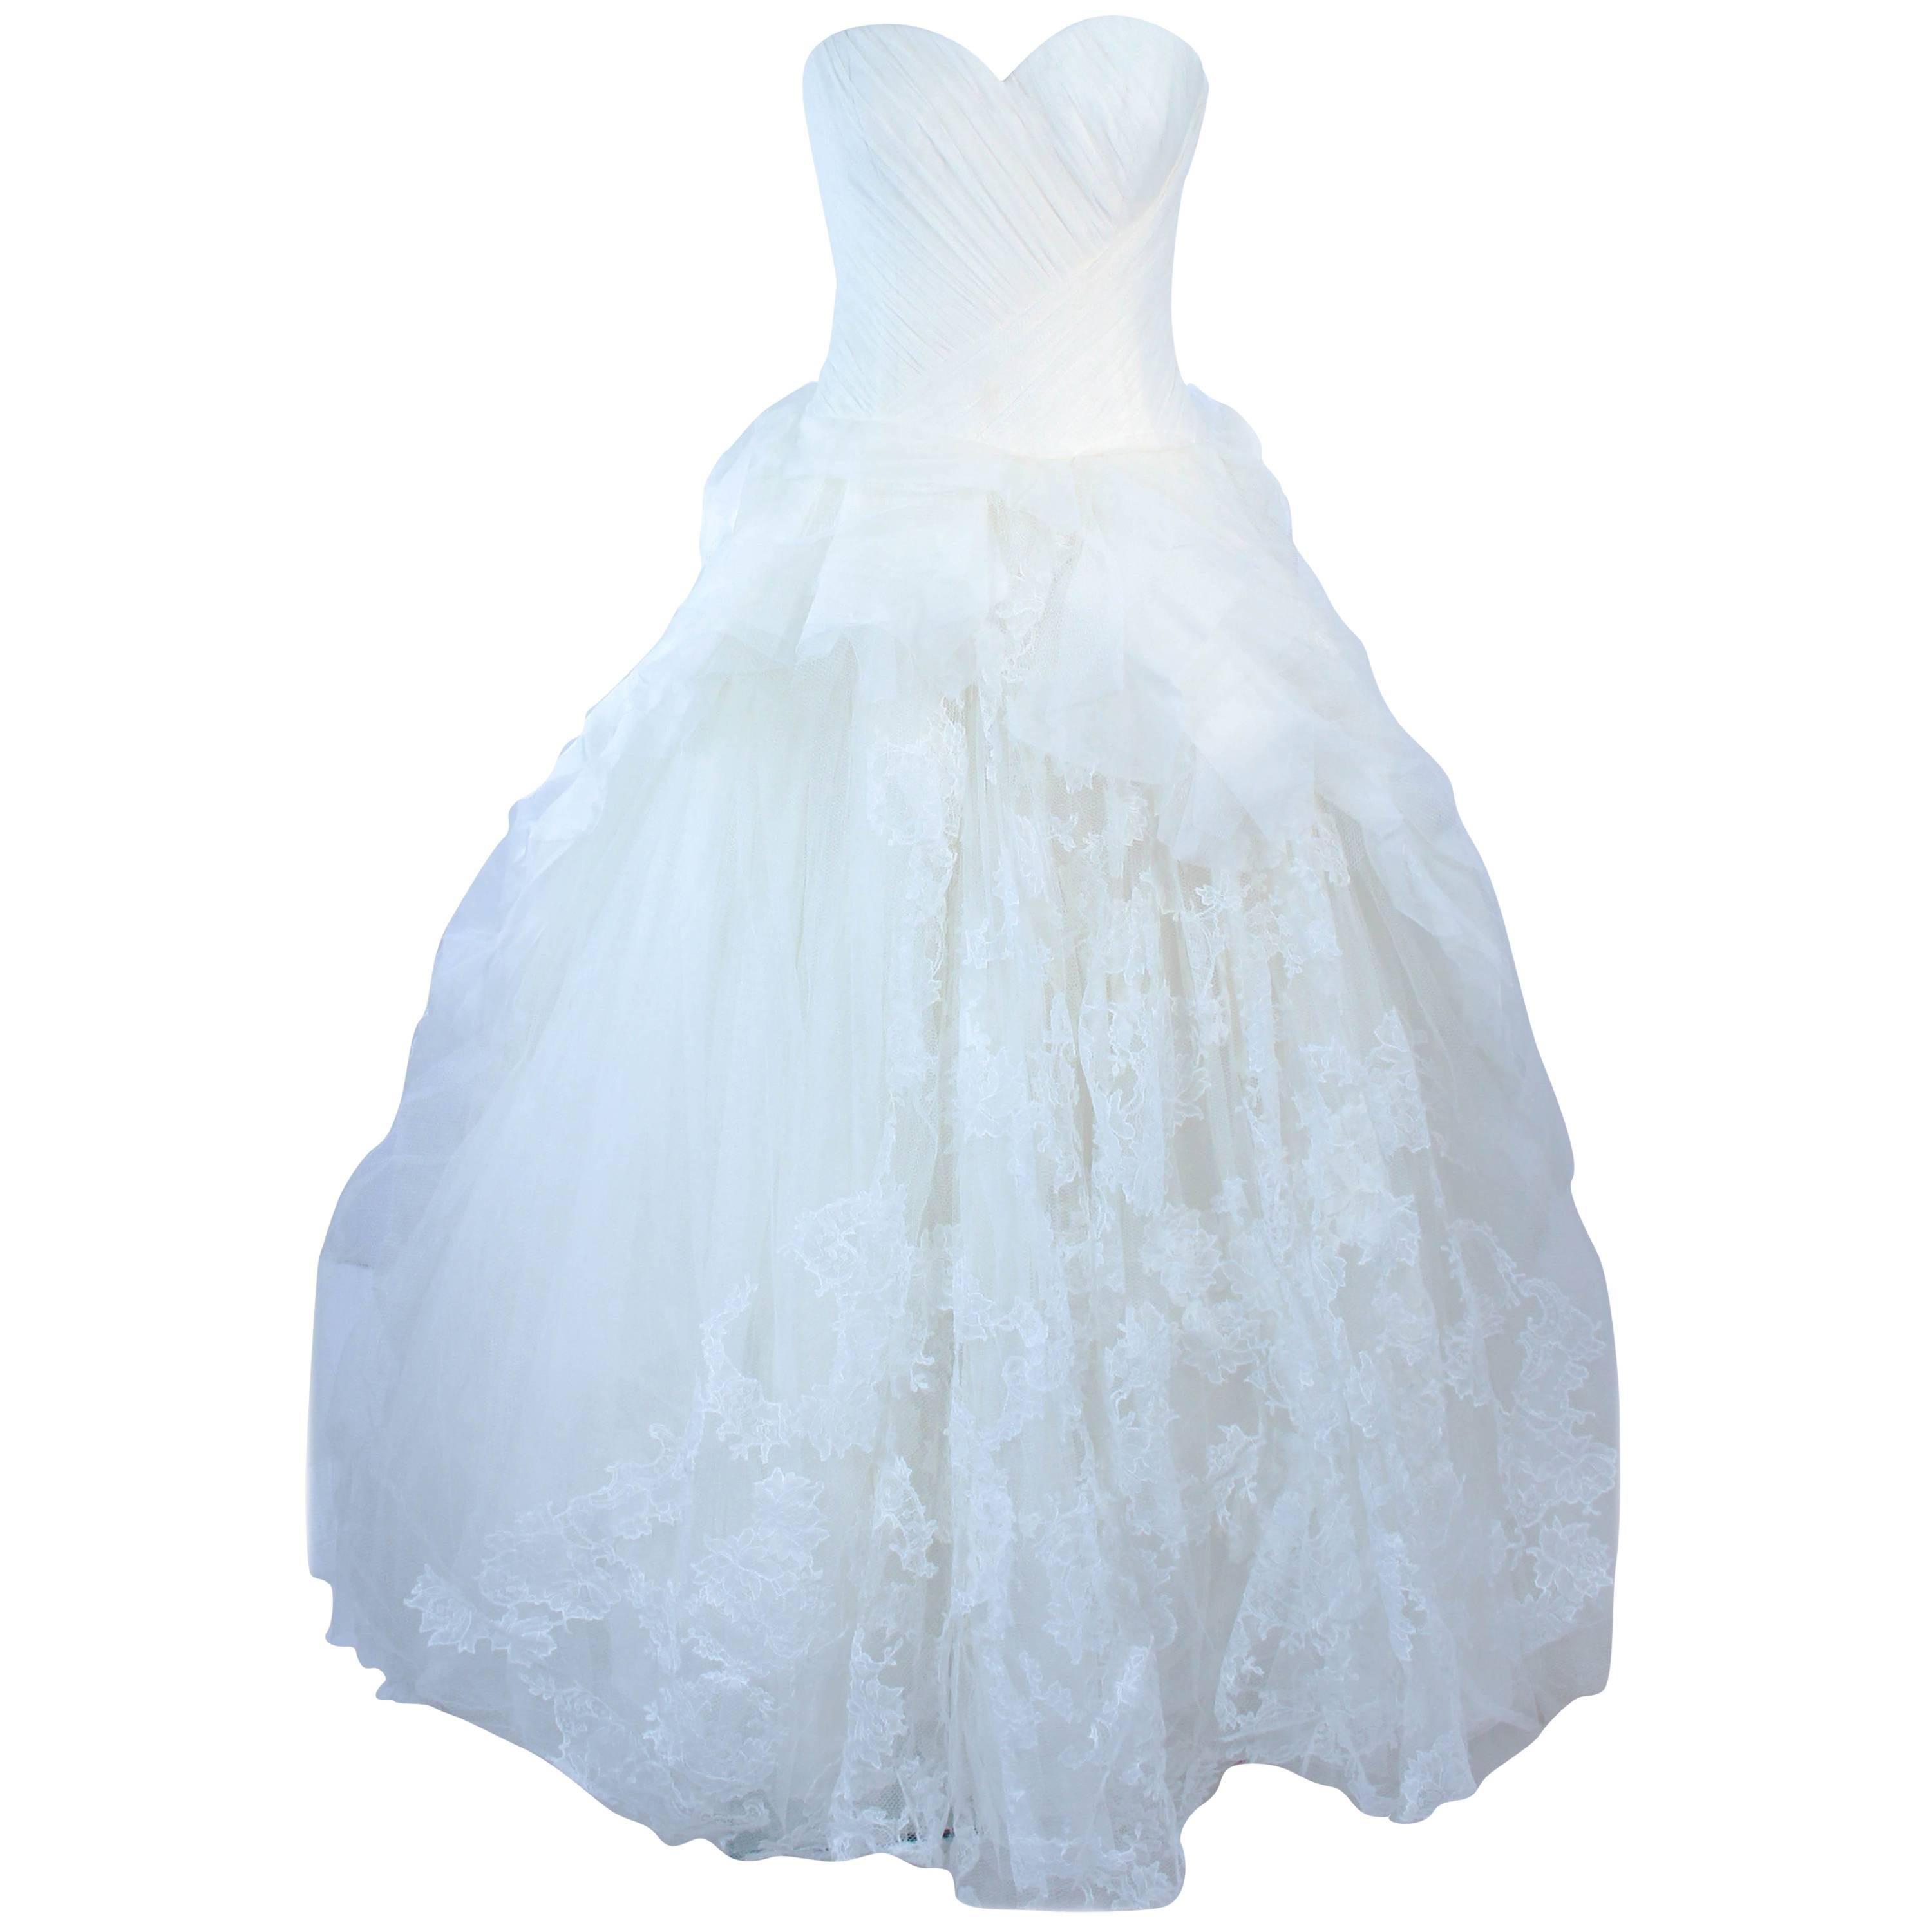 VERA WANG White Tulle & Lace Wedding Gown With Gathered Bustier Size 4 10K